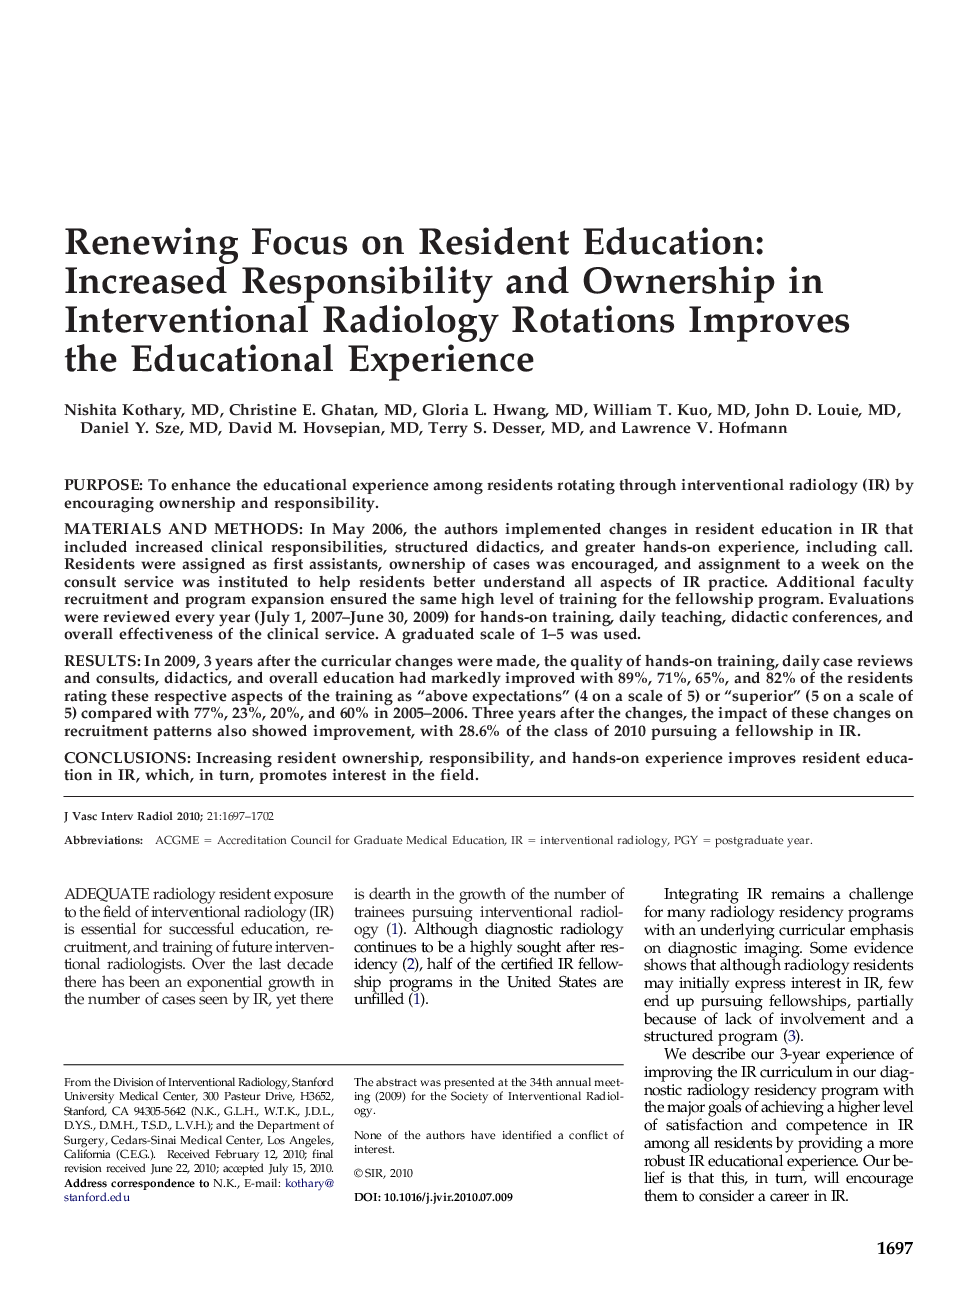 Renewing Focus on Resident Education: Increased Responsibility and Ownership in Interventional Radiology Rotations Improves the Educational Experience